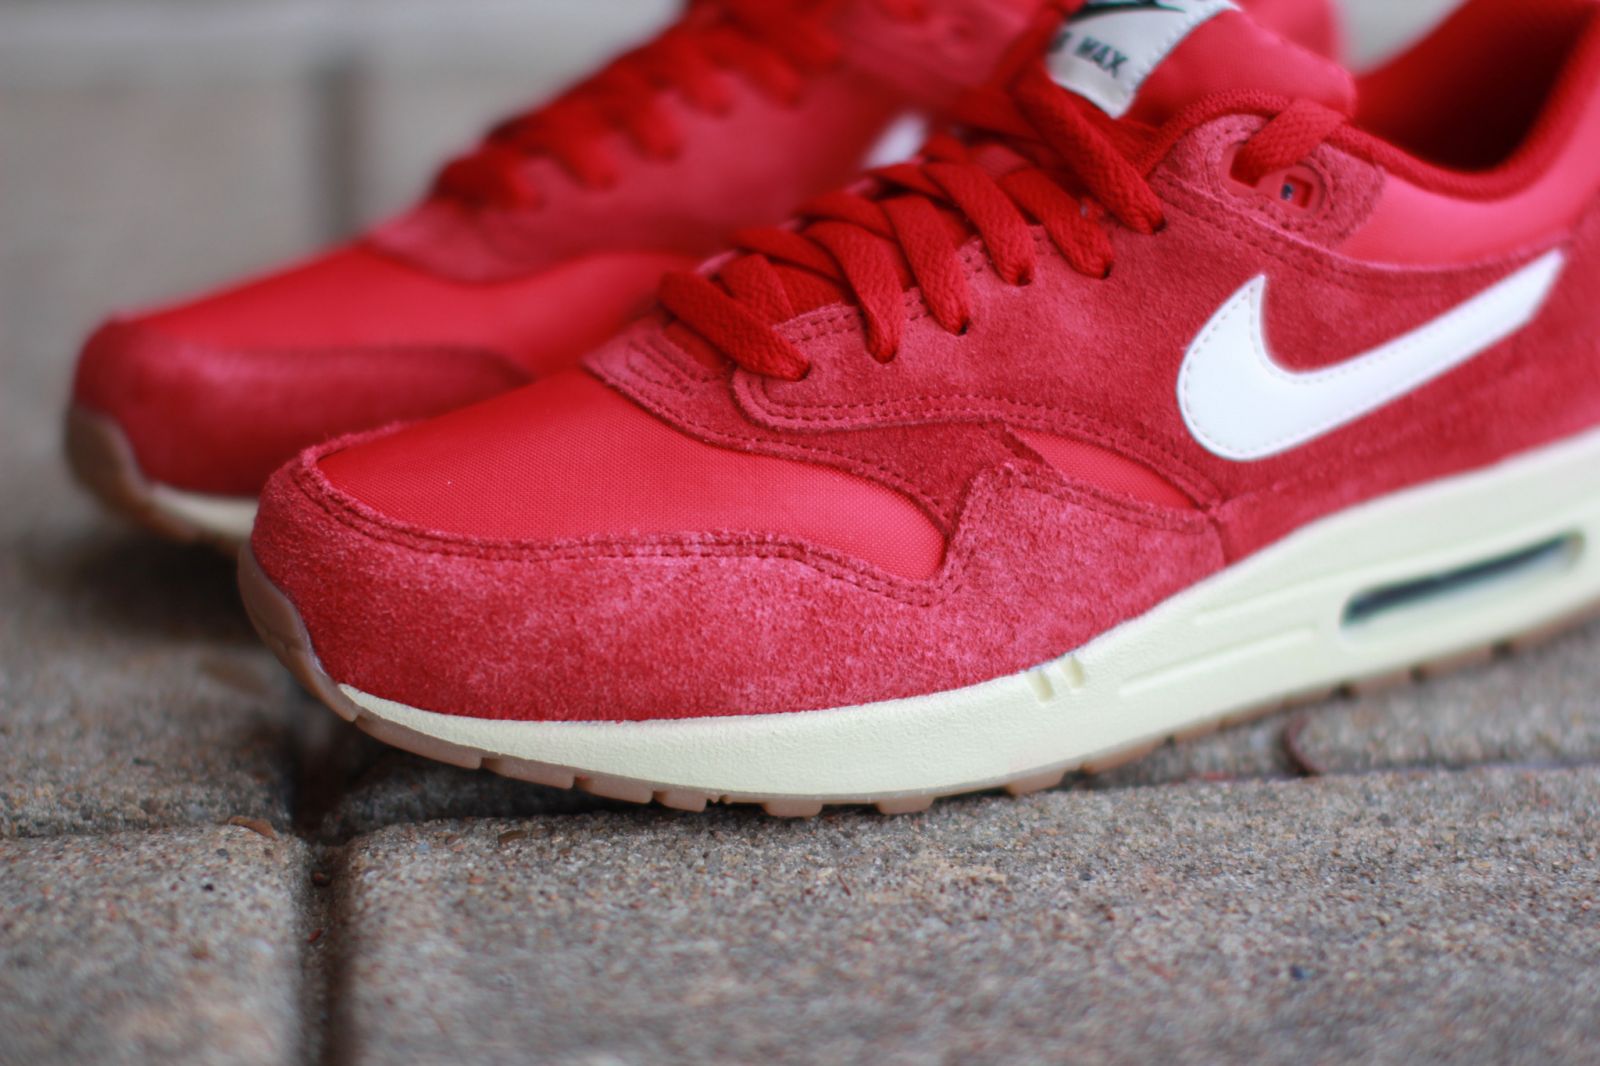 Nike Air Max 1 Suede 'Gym Red' | Sole Collector